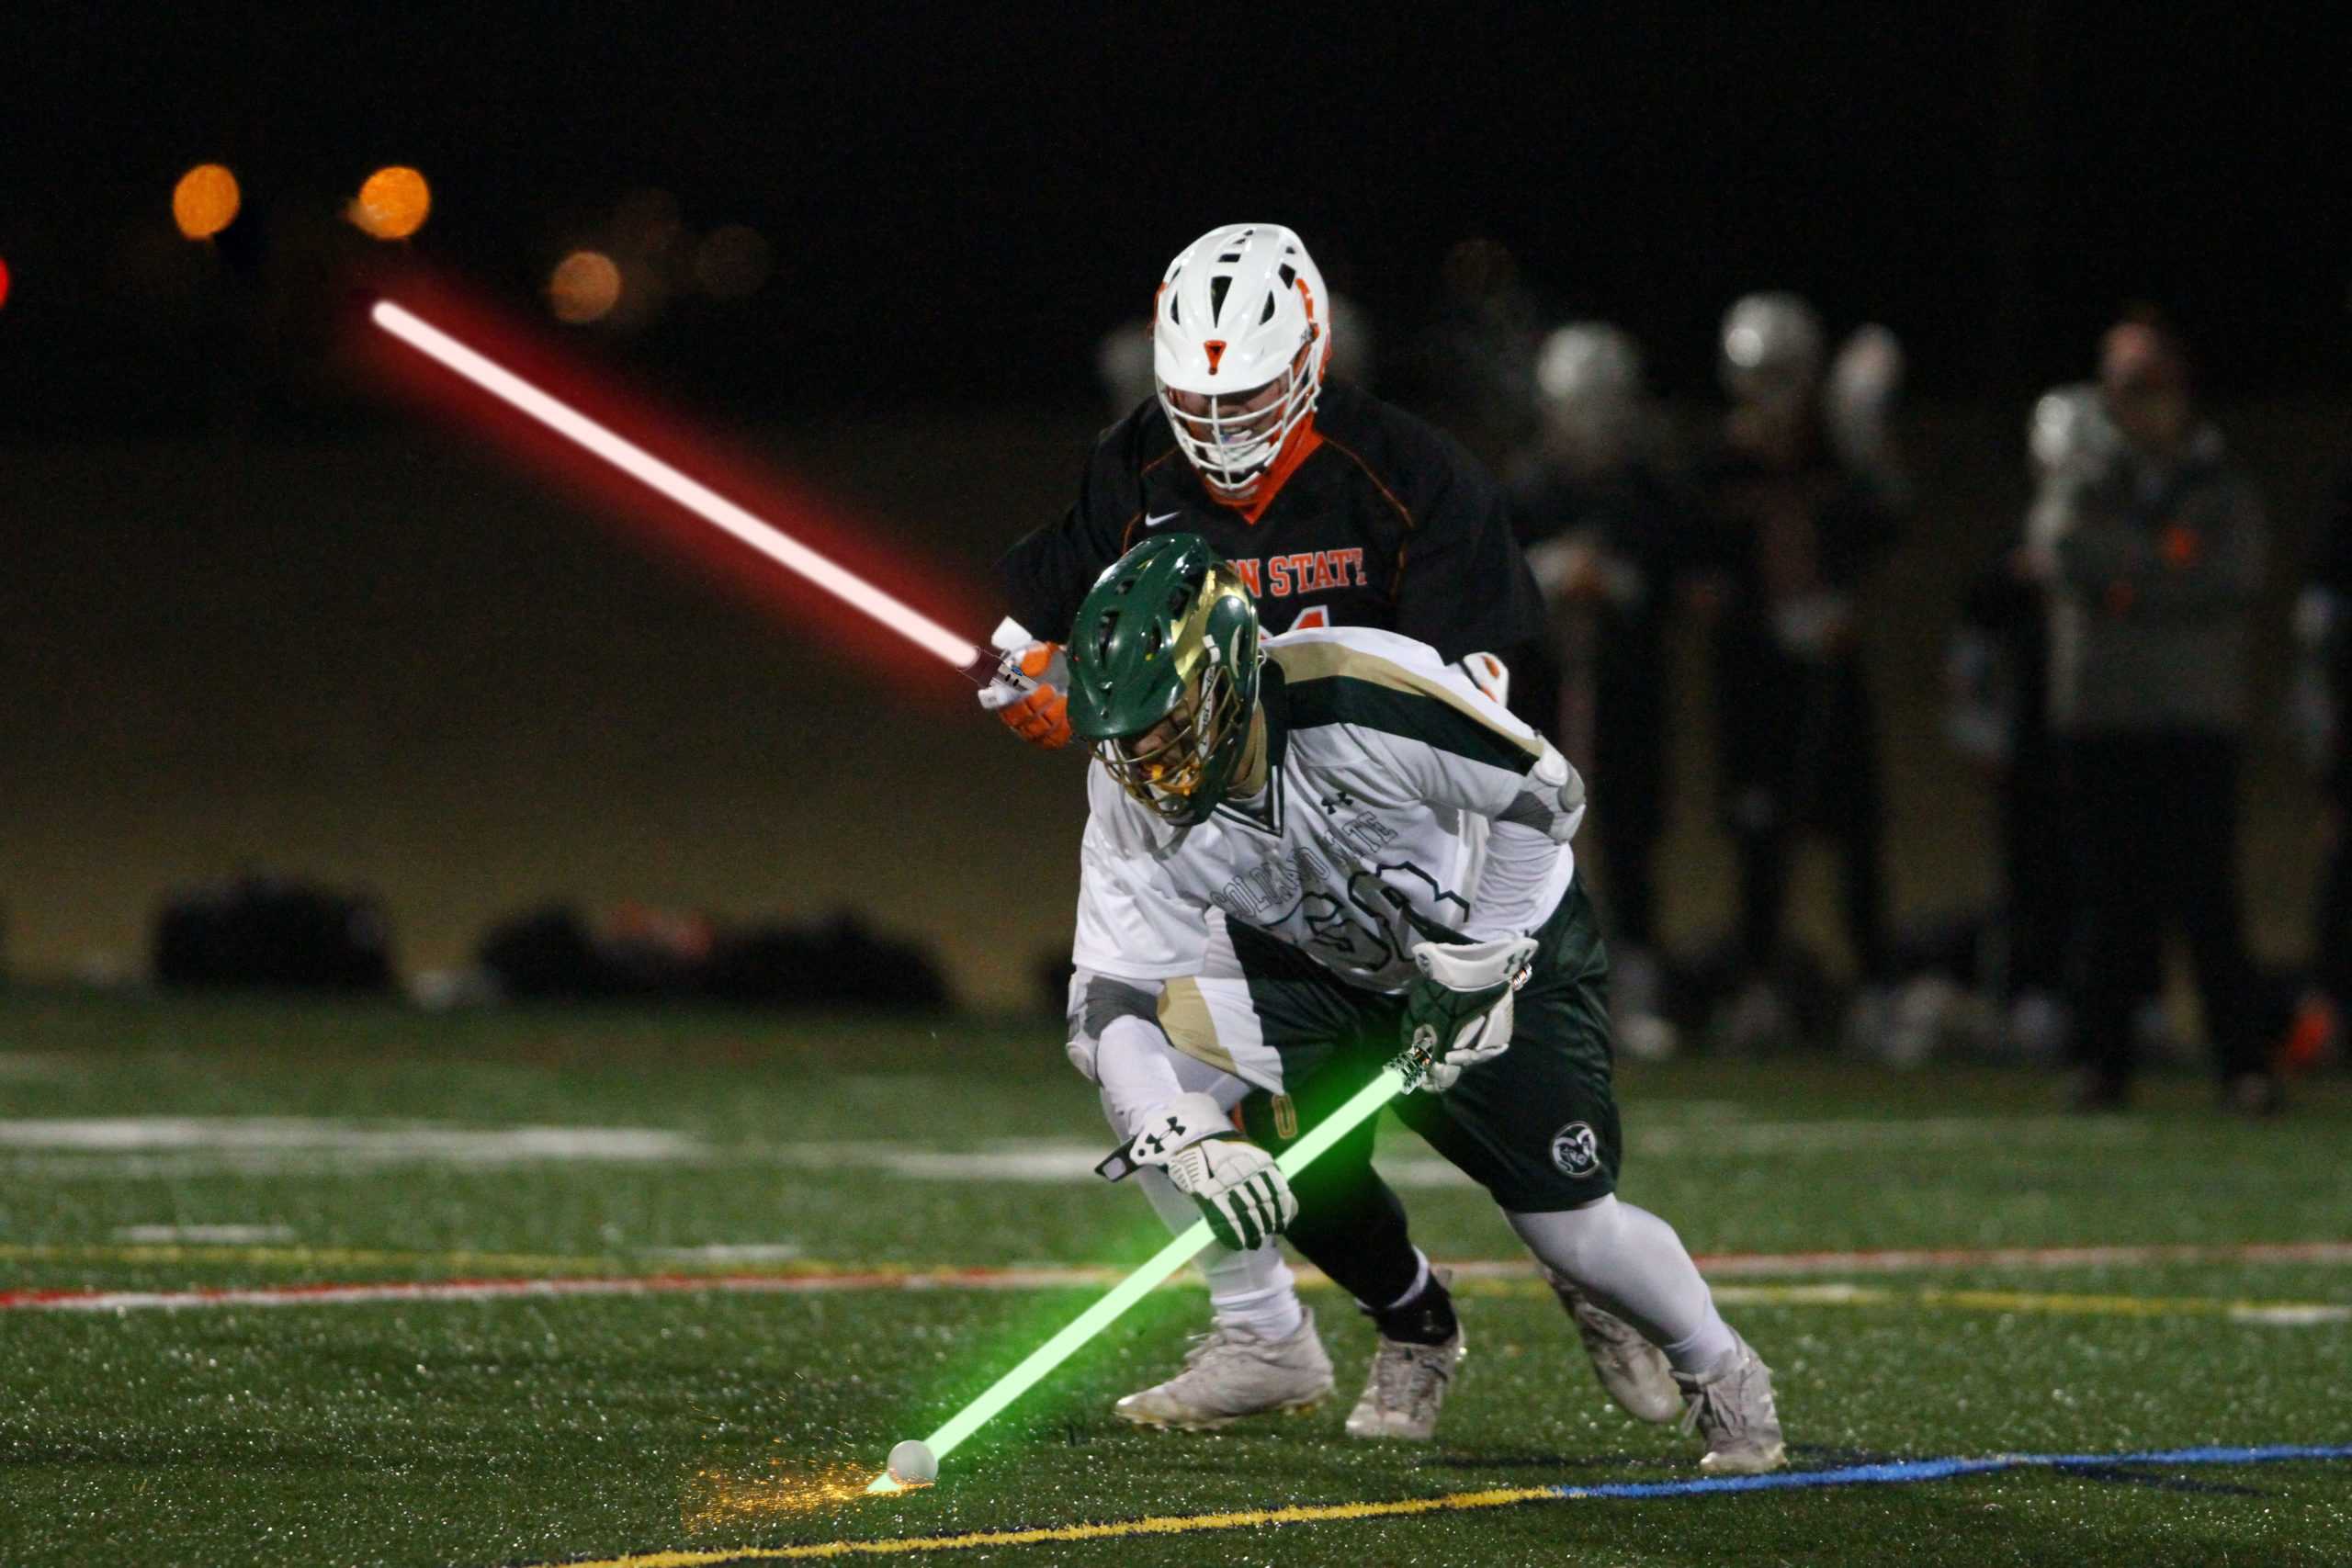 photoshop image of lacrosse players holding light sabers